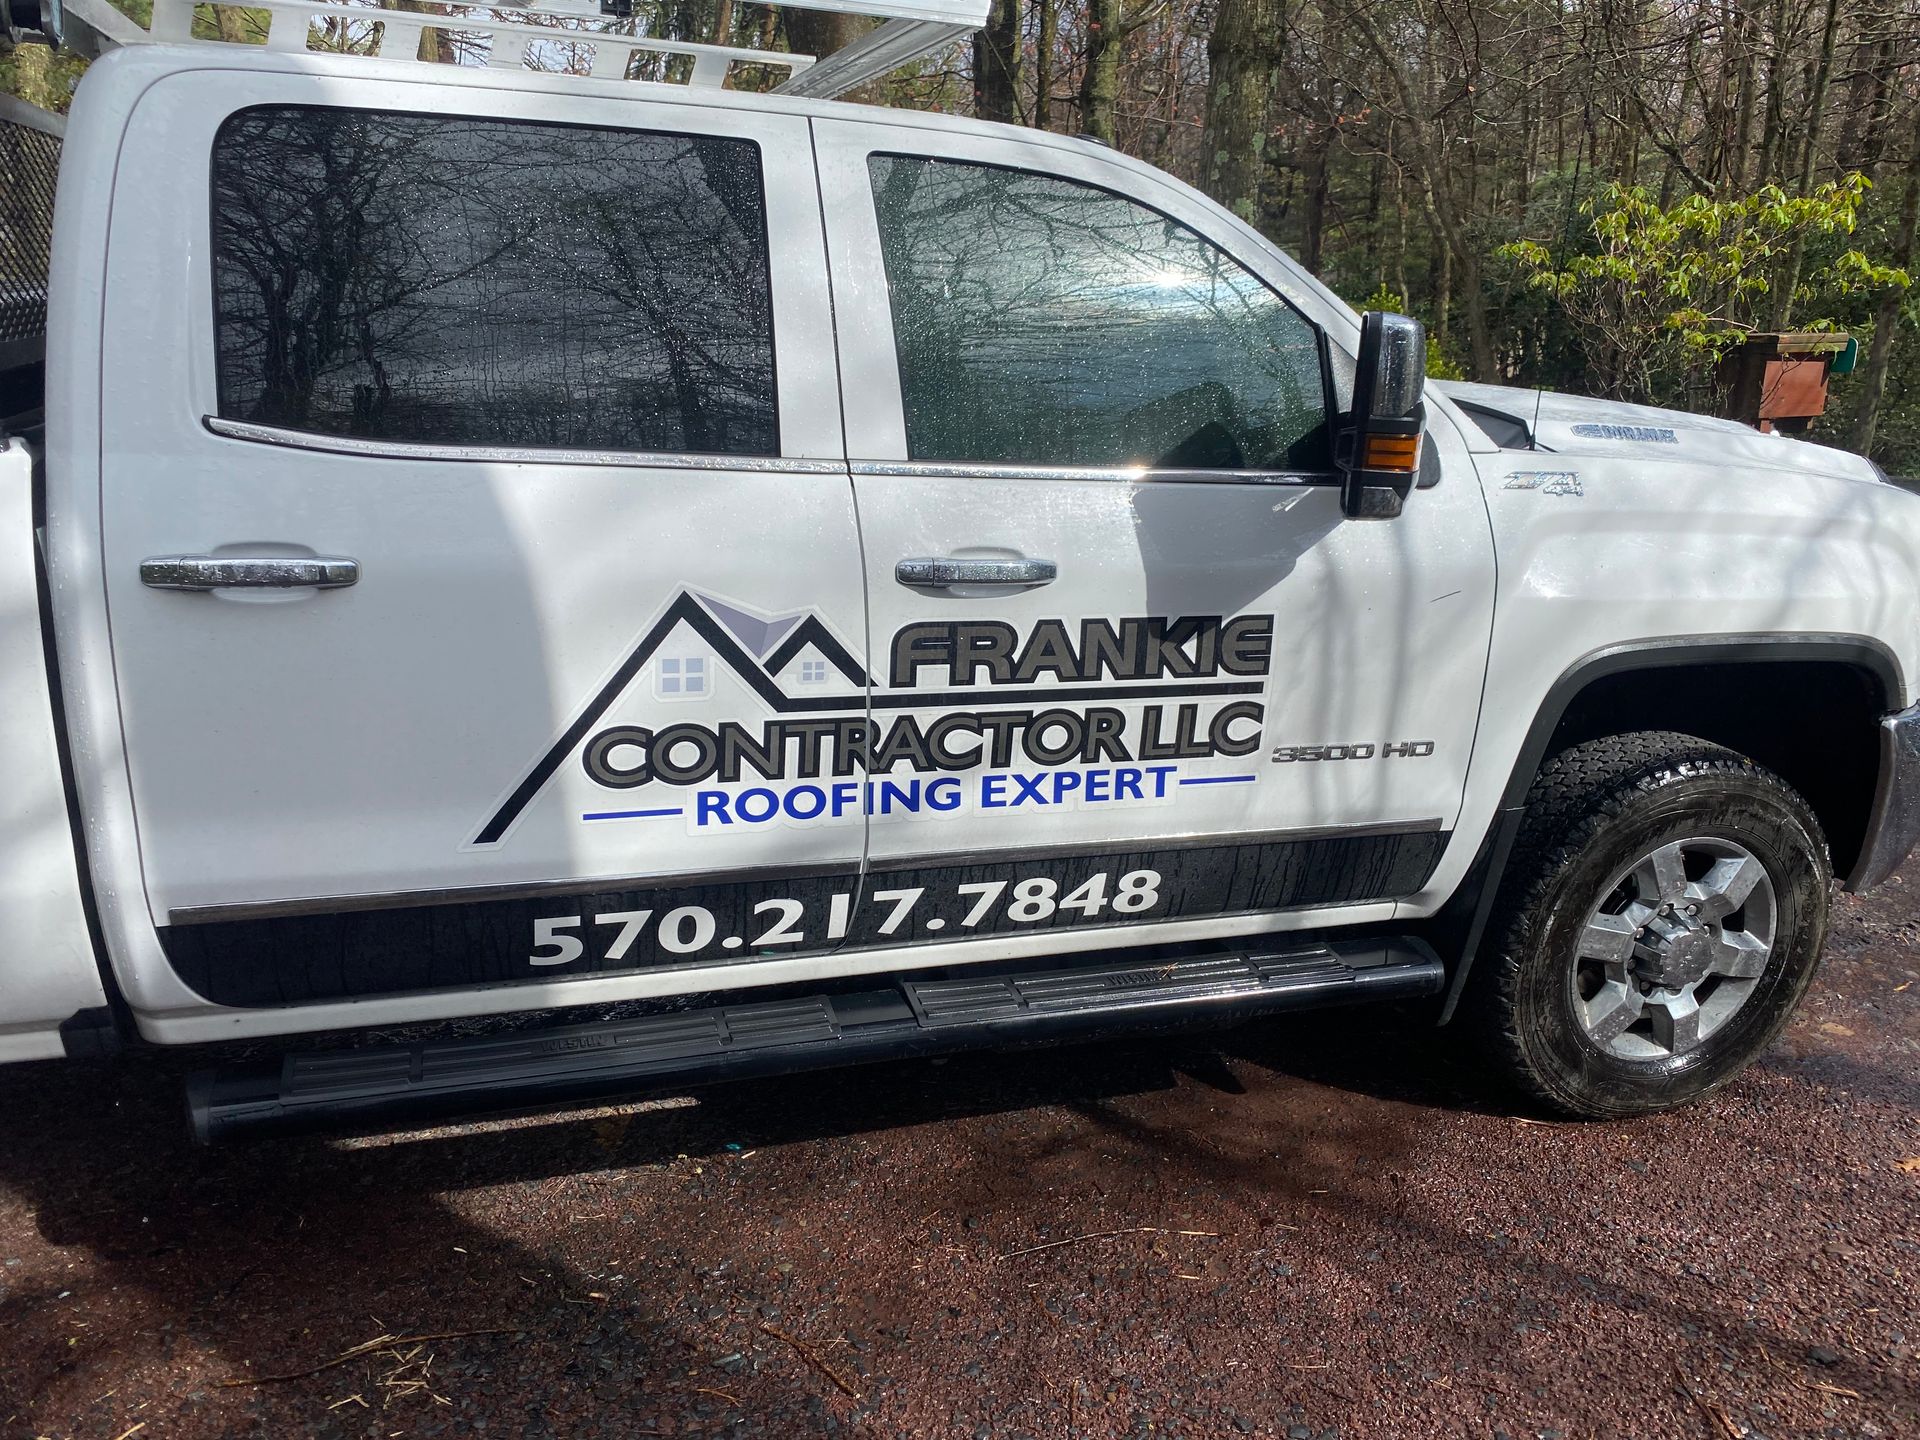 Roofing Service truck